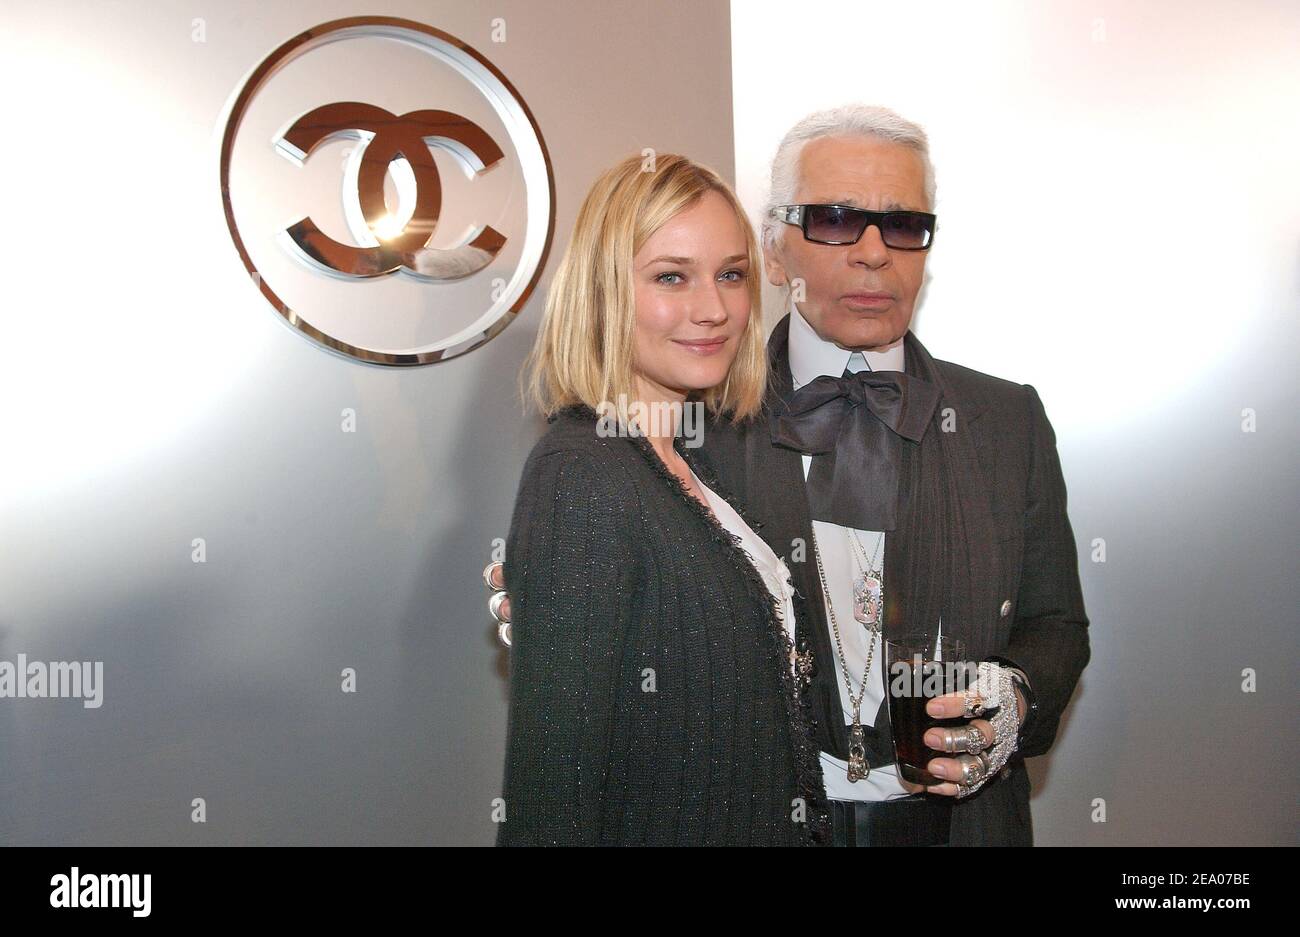 German born actress Diane Kruger and German fashion designer Karl Lagerfeld pictured during the backsatge of the Chanel Ready-to-Wear Fall-Winter 2005-2006 collection in Paris-France on March 4, 2005. Photo by Klein-Hounsfield/ABACA. Stock Photo